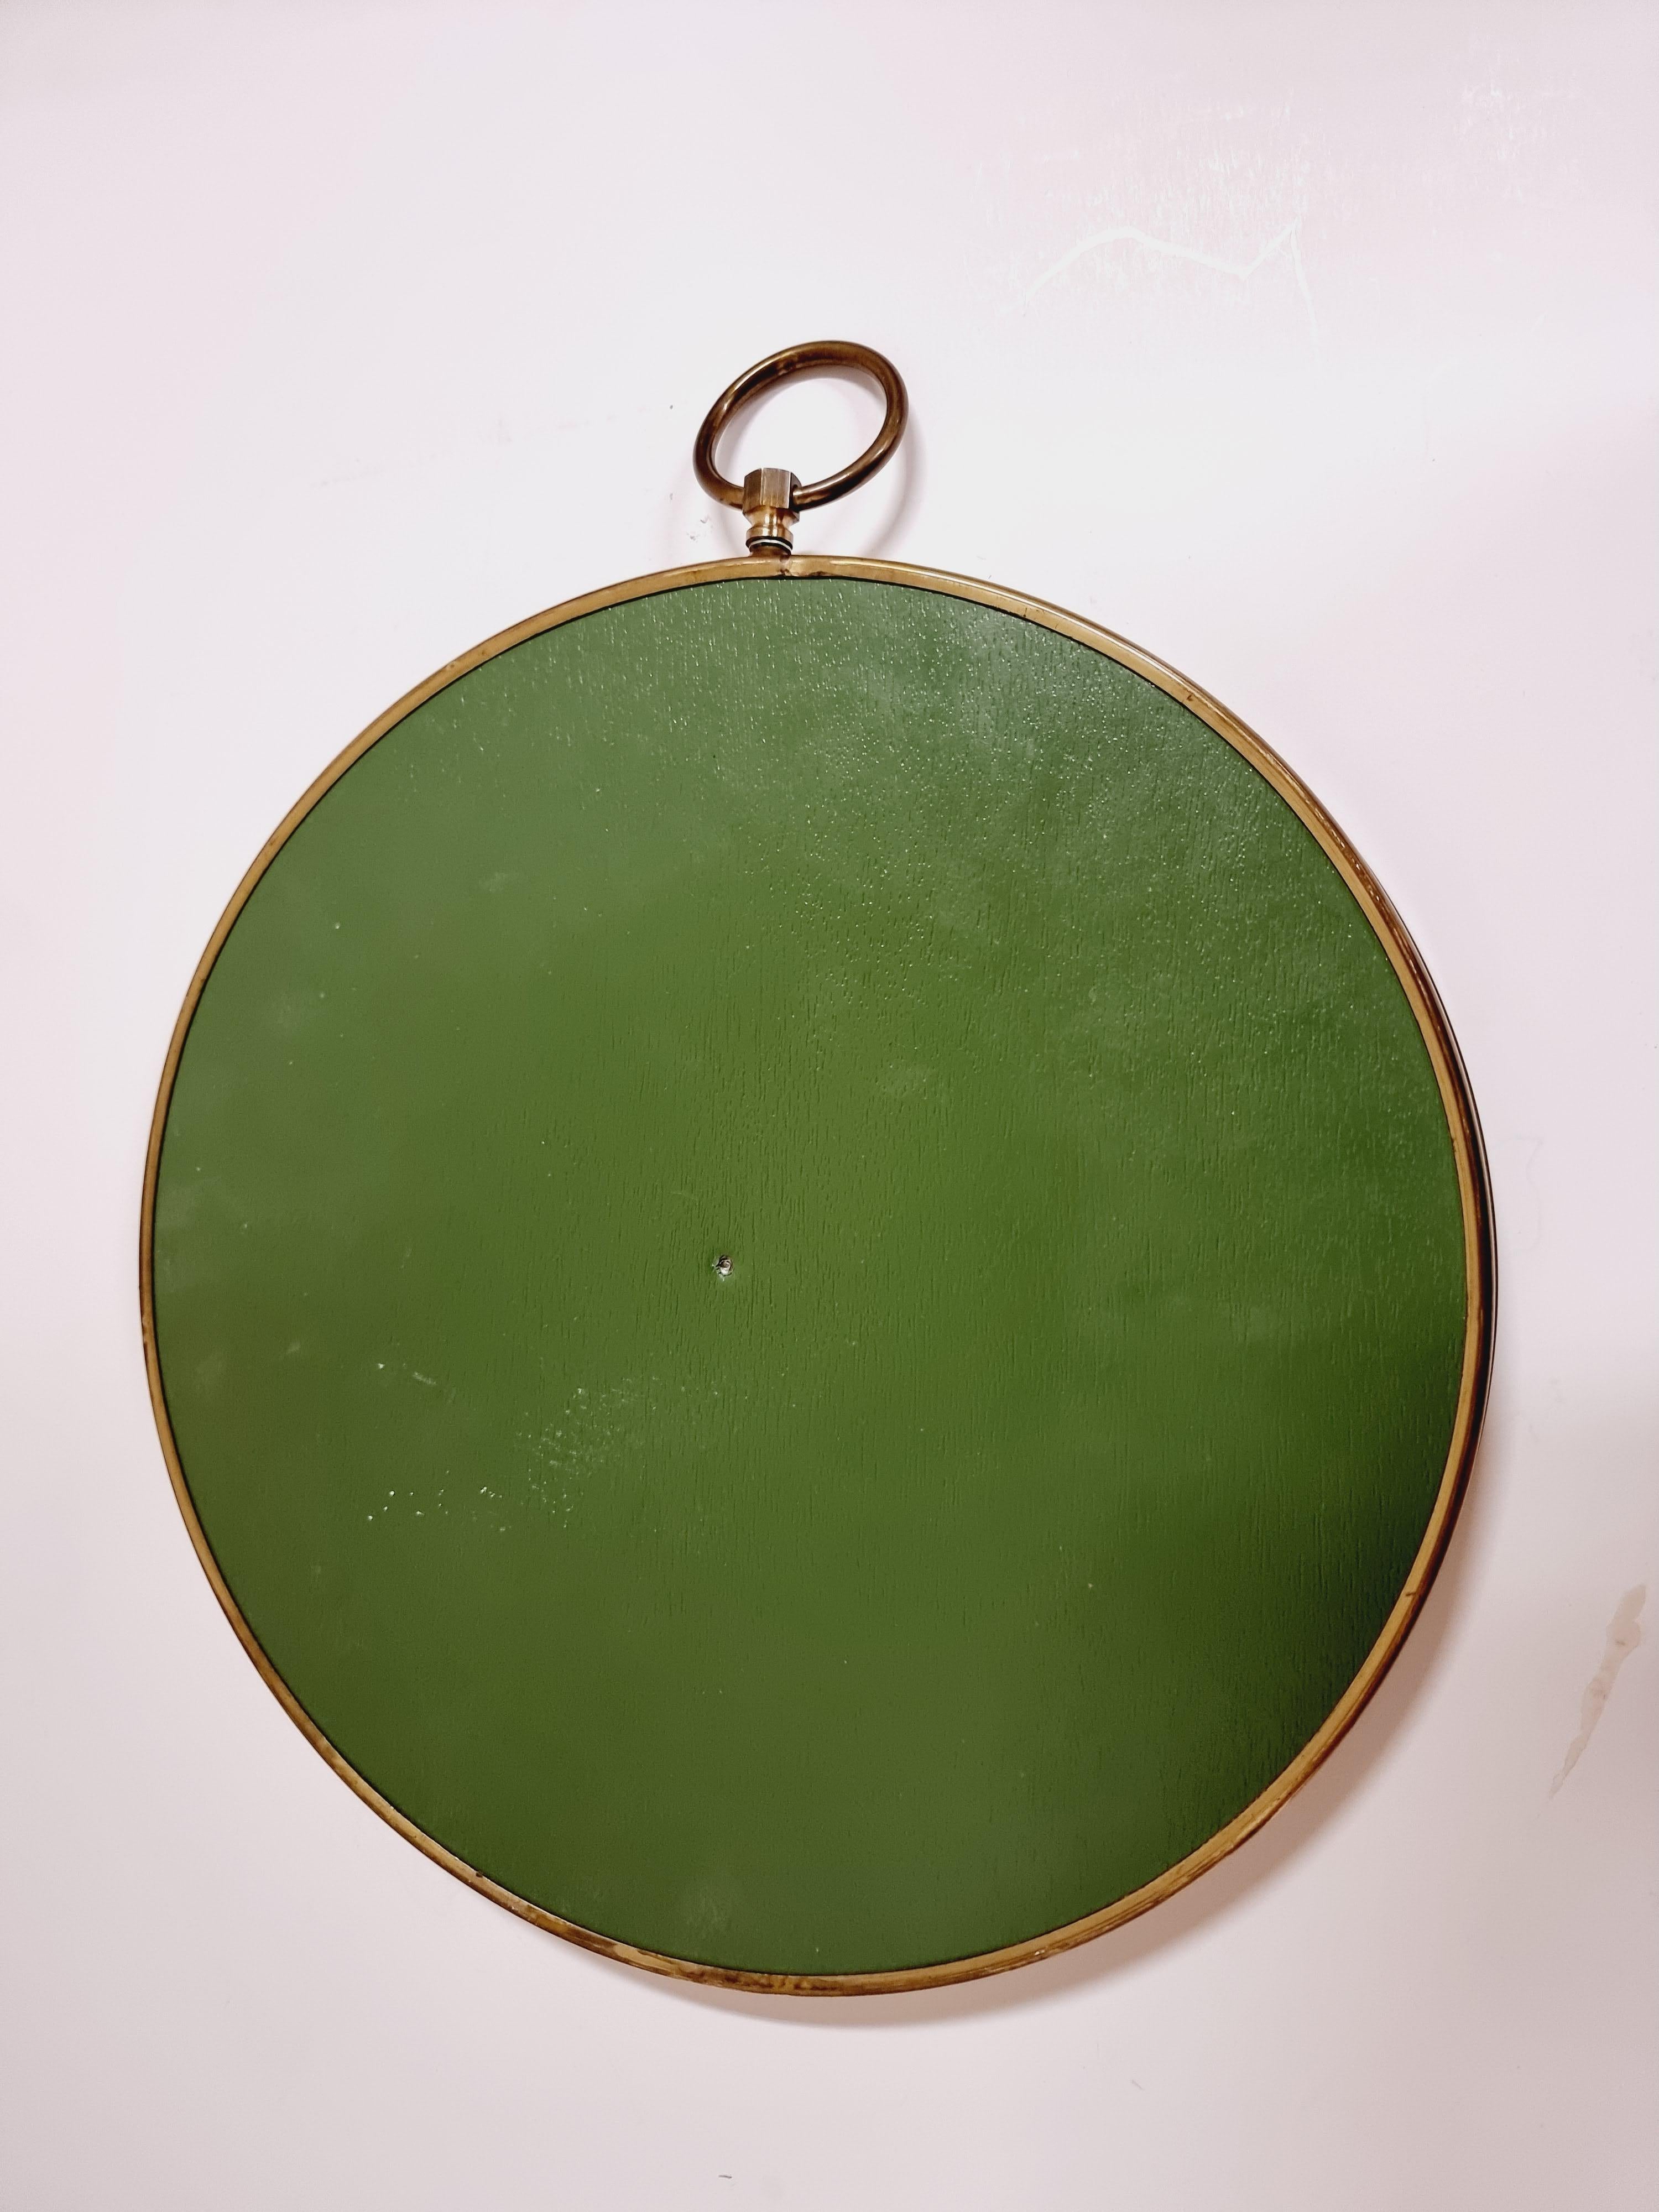 20th Century Mirror with Brass Frame, Pocketwatch Shaped, Mid-Century Modern For Sale